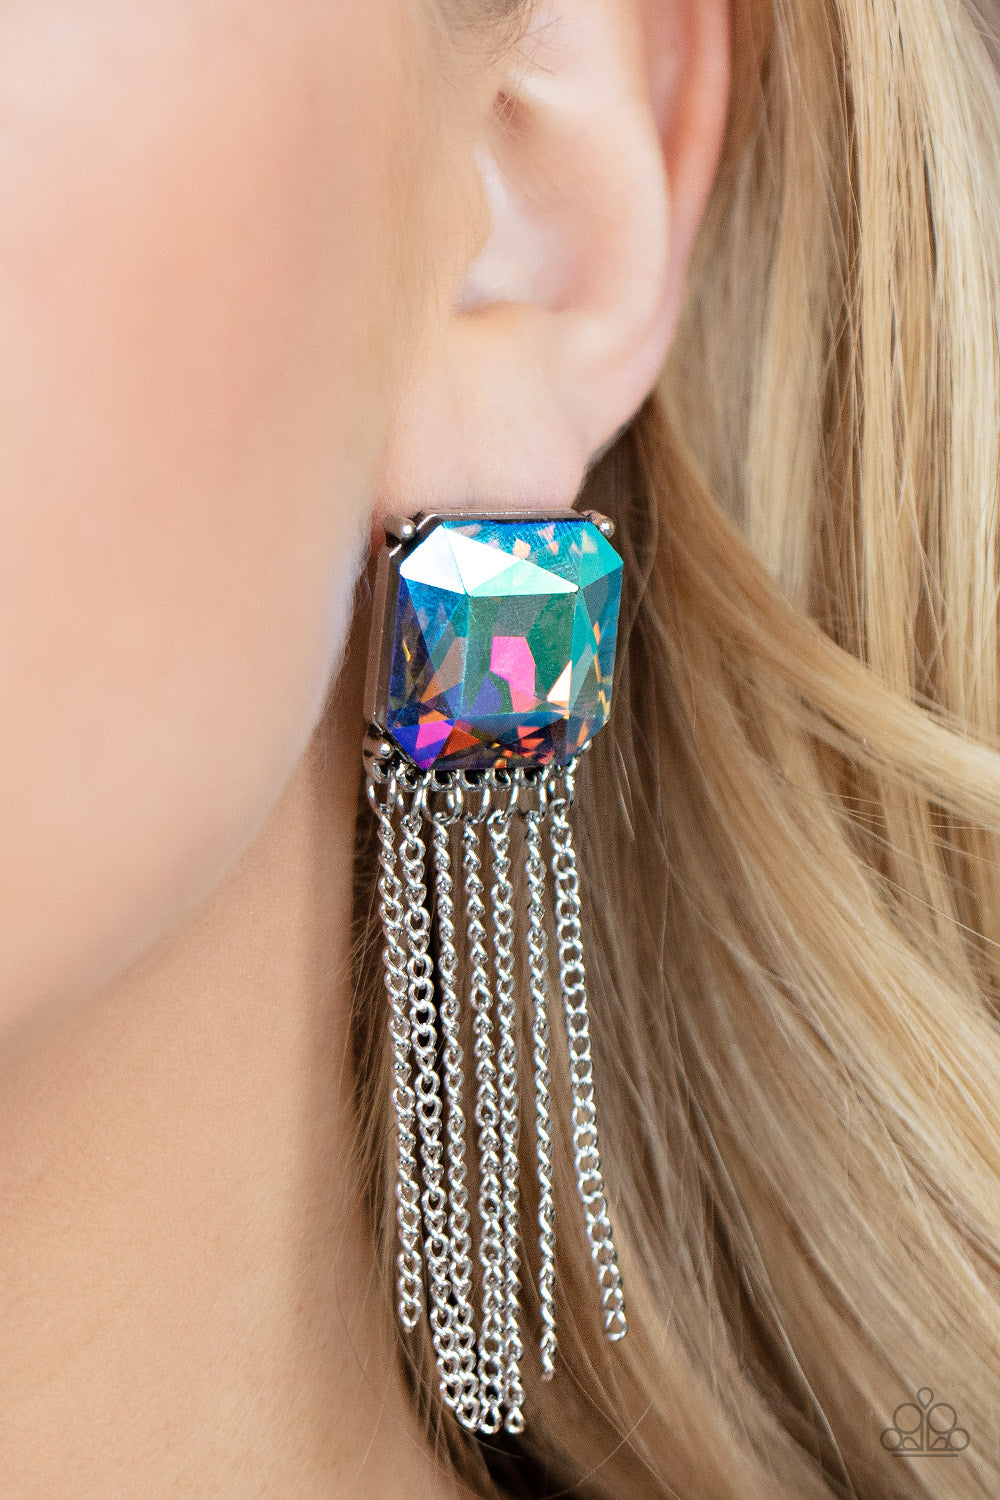 Supernova Novelty Multi Earring - Paparazzi Accessories  Featuring a stellar UV shimmer, an oversized radiant cut gem is pressed into a pronged silver fitting that gives way to a tapered curtain of silver chains for an out-of-this-world finish. Earring attaches to a standard post fitting.  All Paparazzi Accessories are lead free and nickel free!  Sold as one pair of post earrings.